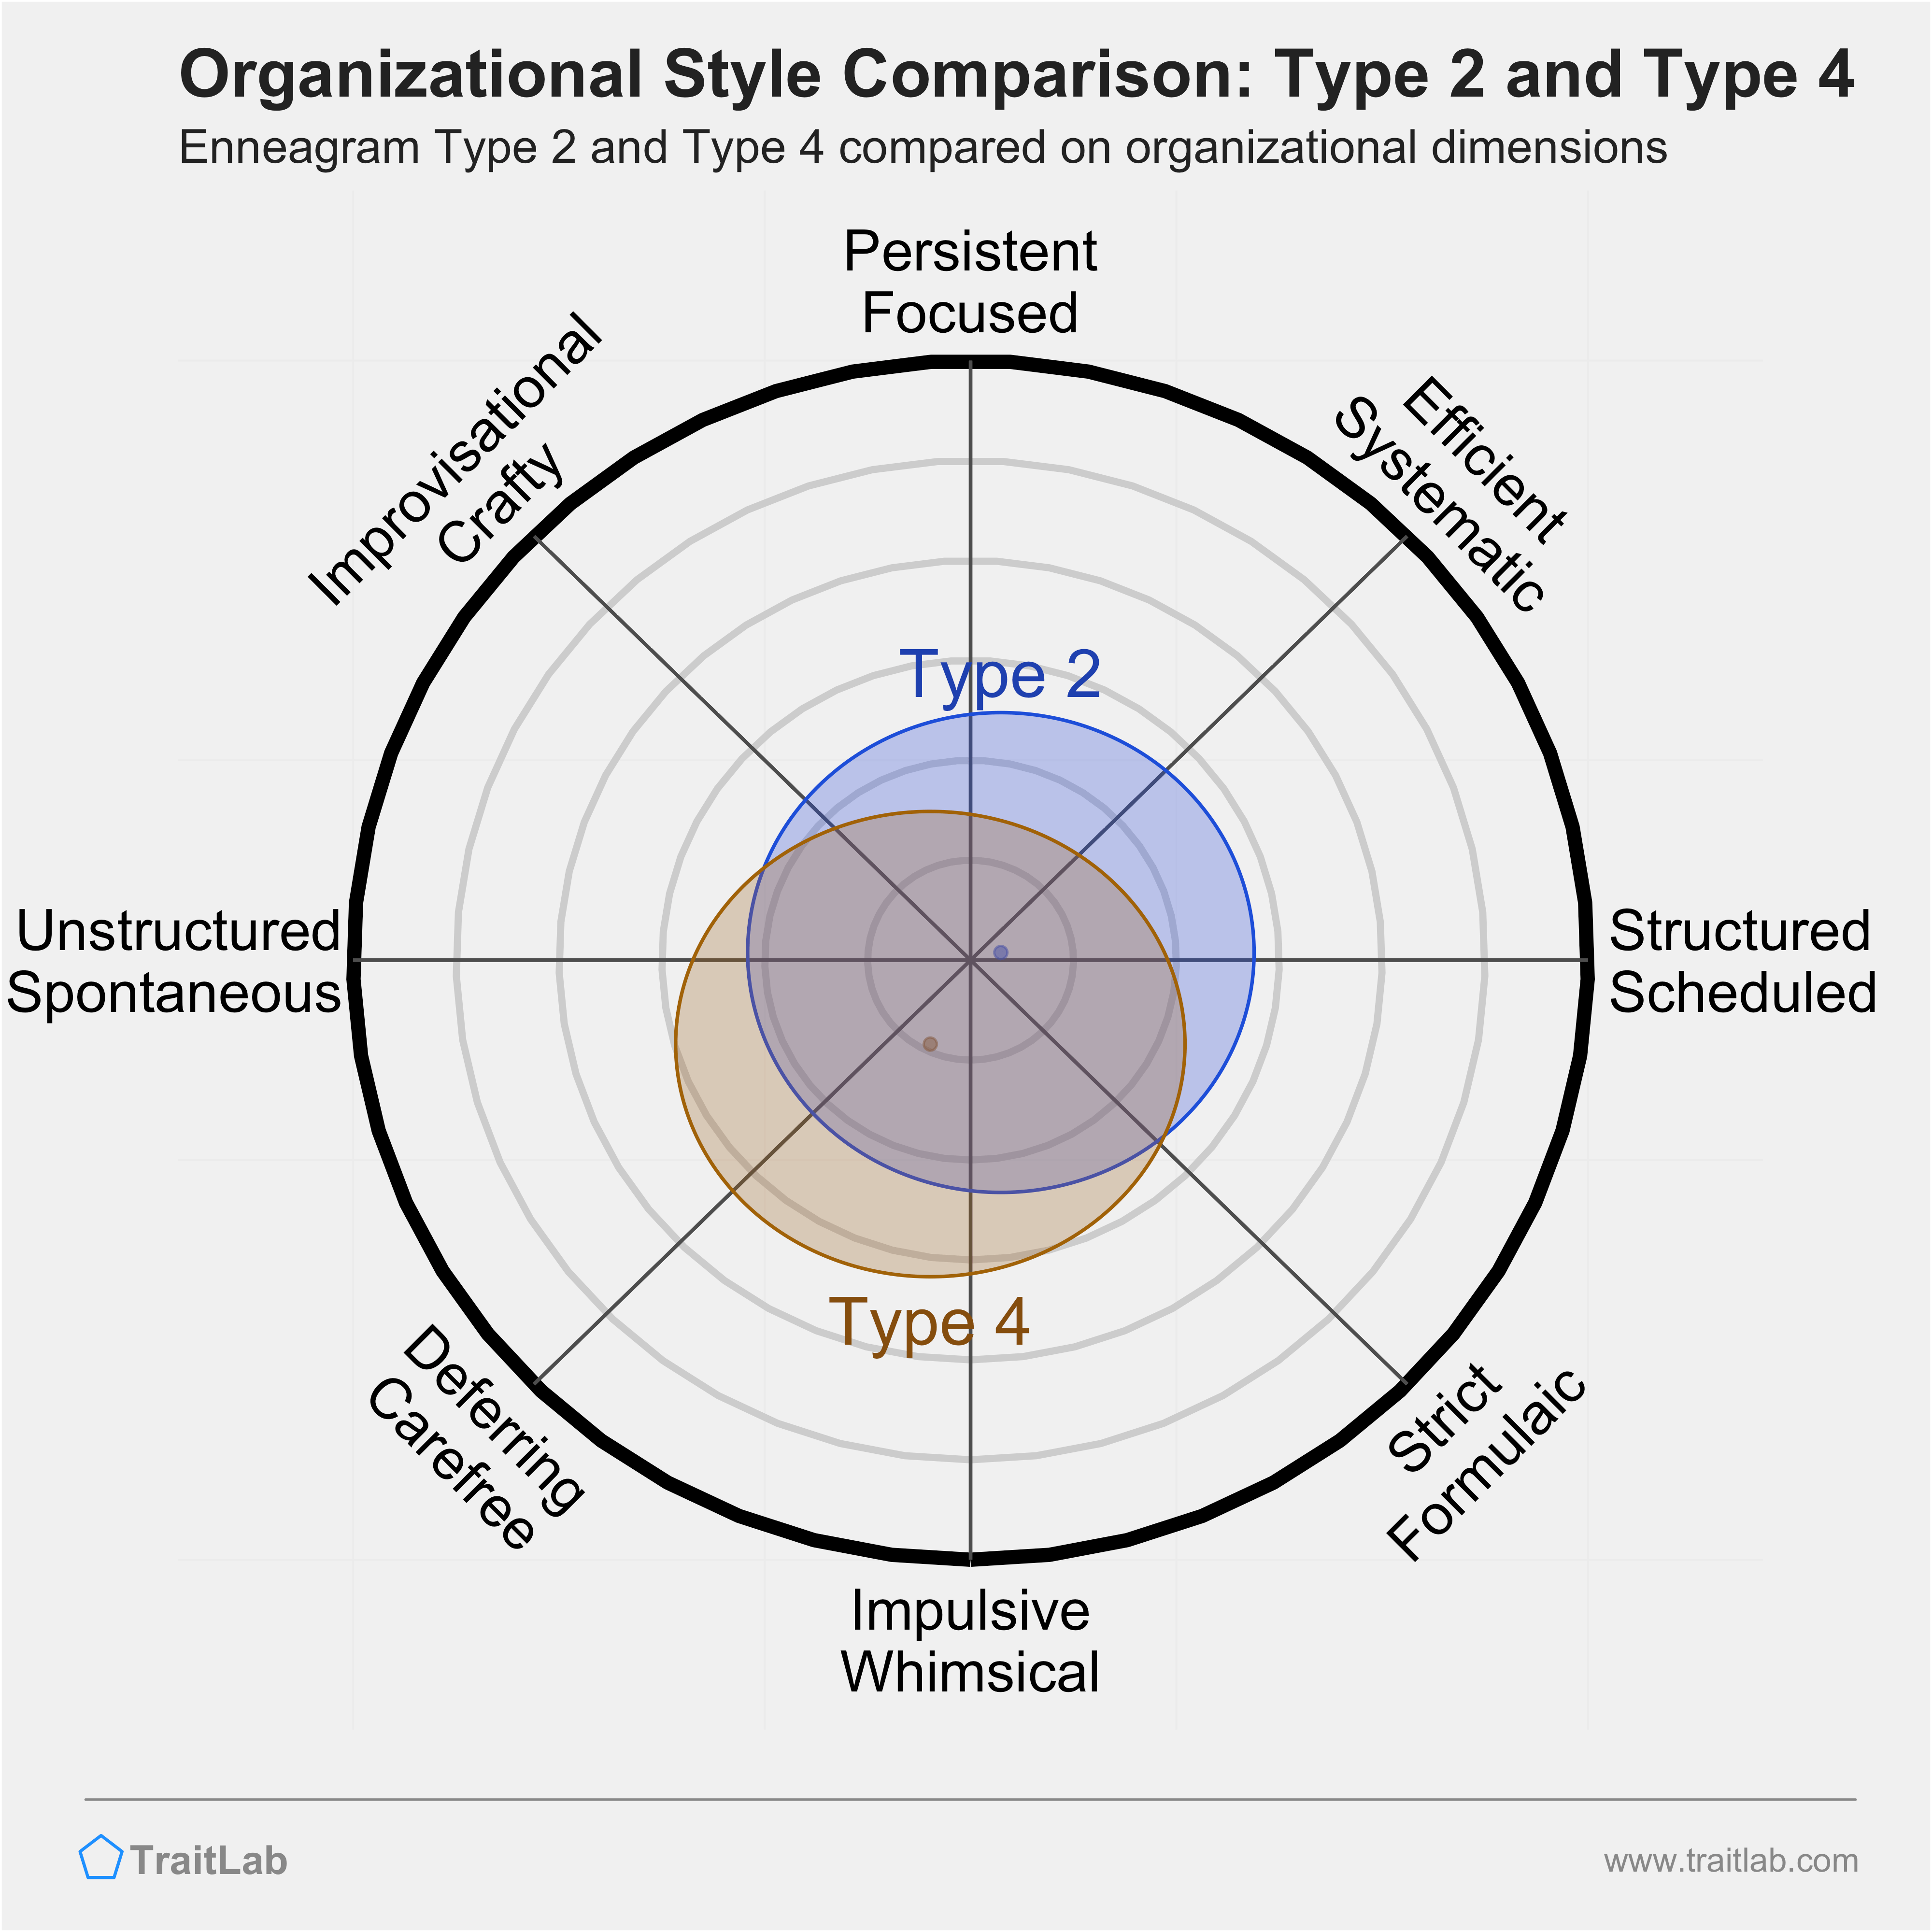 Type 2 and Type 4 comparison across organizational dimensions